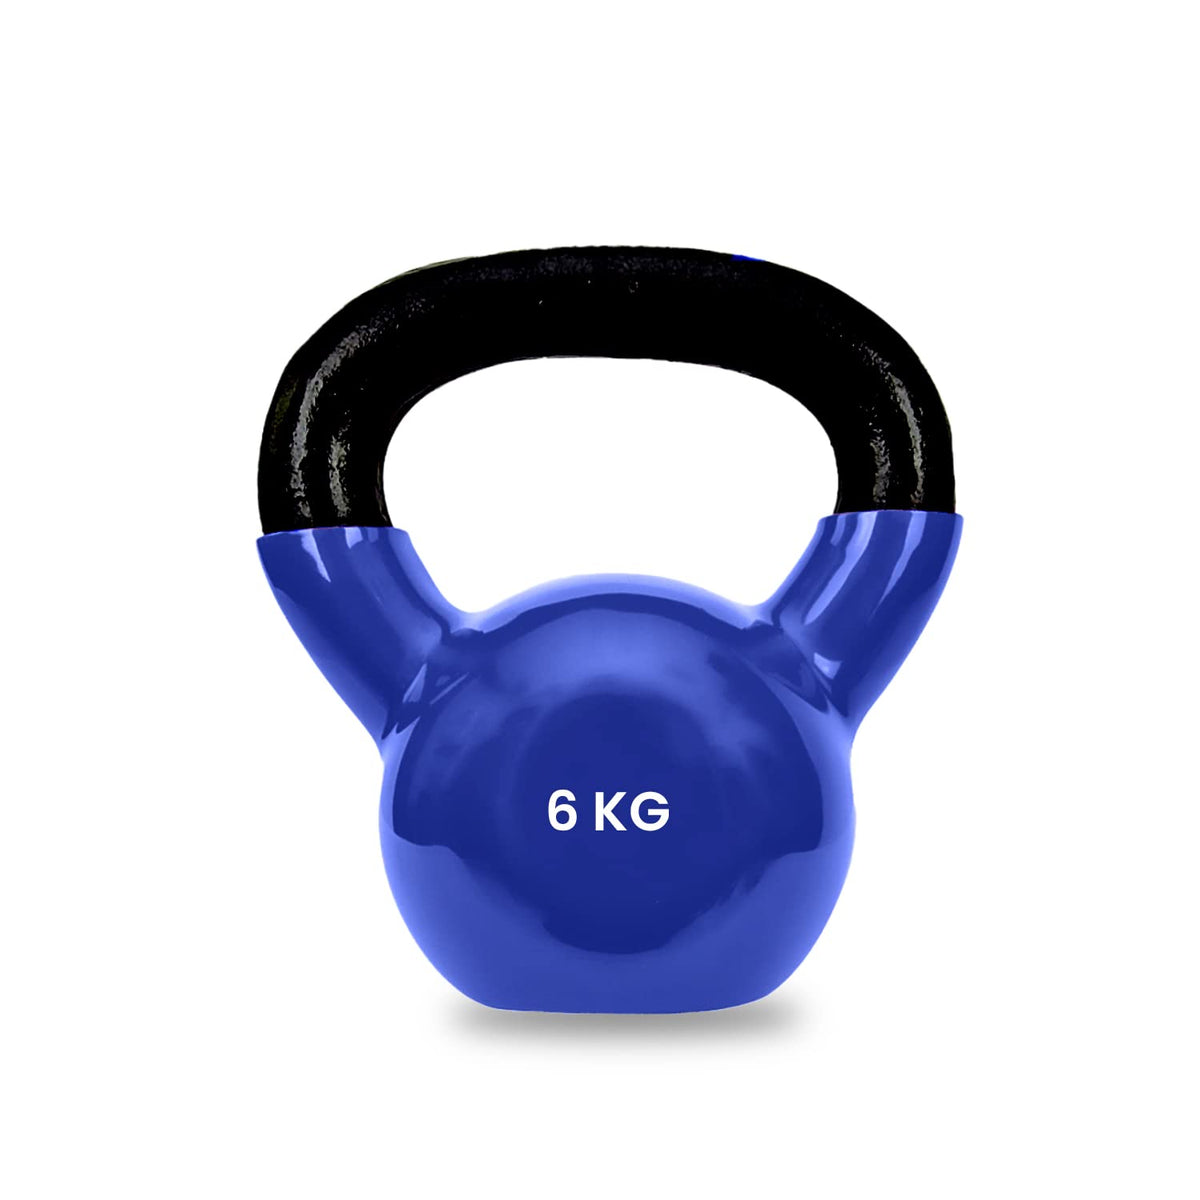 Strauss Premium Vinyl Kettlebell Weight for Men & Women | 10 Kg | Ideal for Home Workout, Yoga, Pilates, Gym Exercises | Non-Slip, Easy to Hold, Scratch Resistant (Blue)